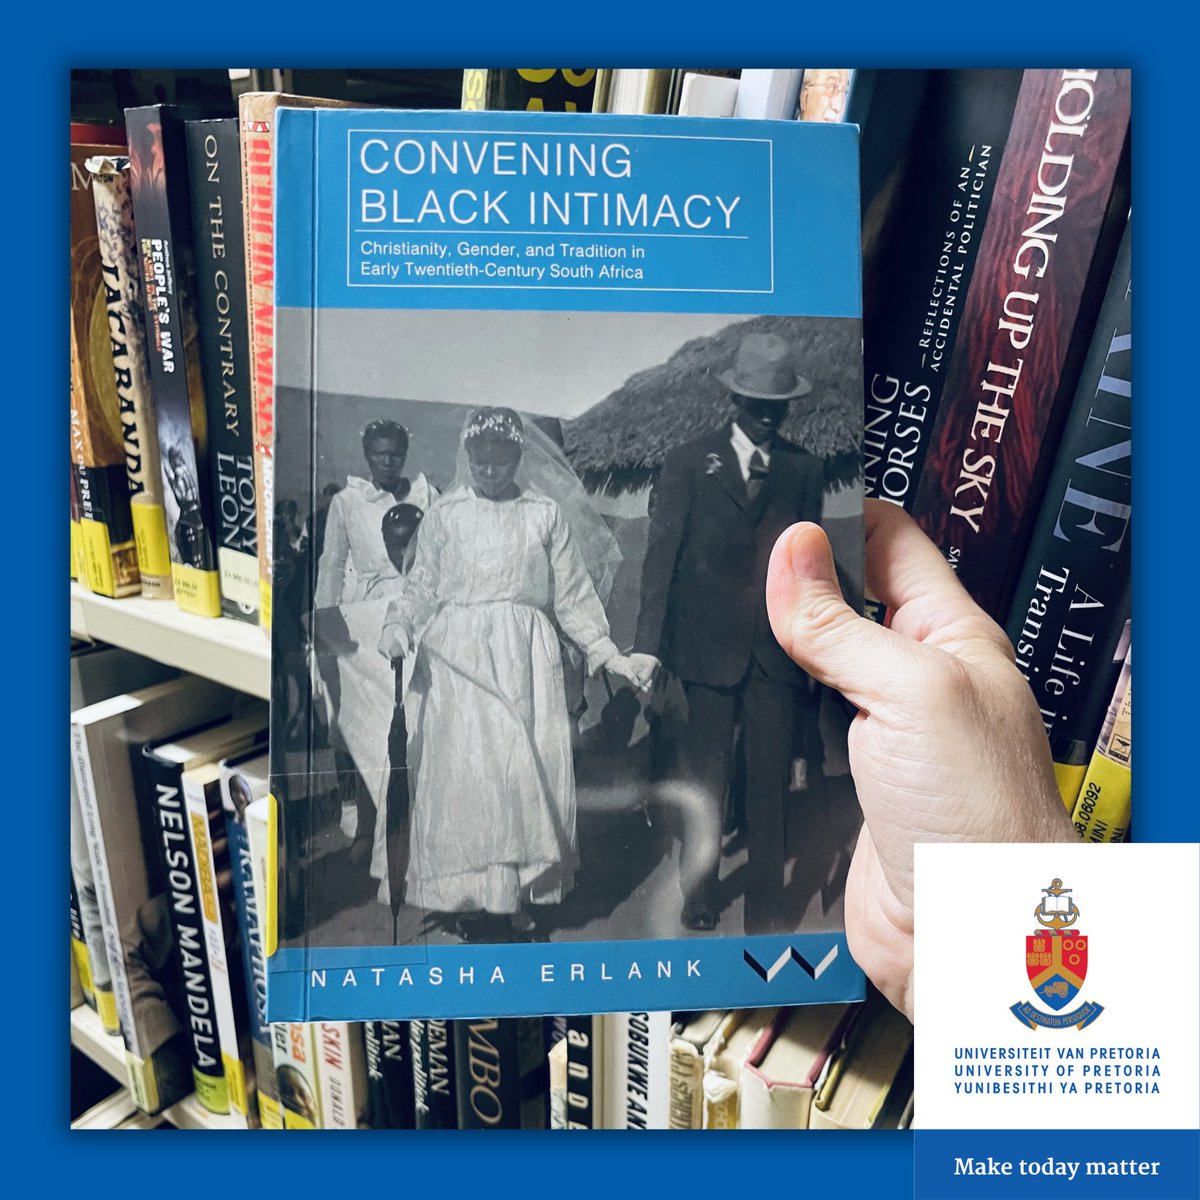 ‘Convening Black Intimacy: Christianity, Gender, and Tradition in Early Twentieth-Century South Africa’ by Natasha Erlank, has been added to our Africana Collection!

➡️ library.up.ac.za/specialcollect…

#UPSpecialCollections #NewBooks 📚 #UPLibrary #socialhistory #sexandgenderstudies